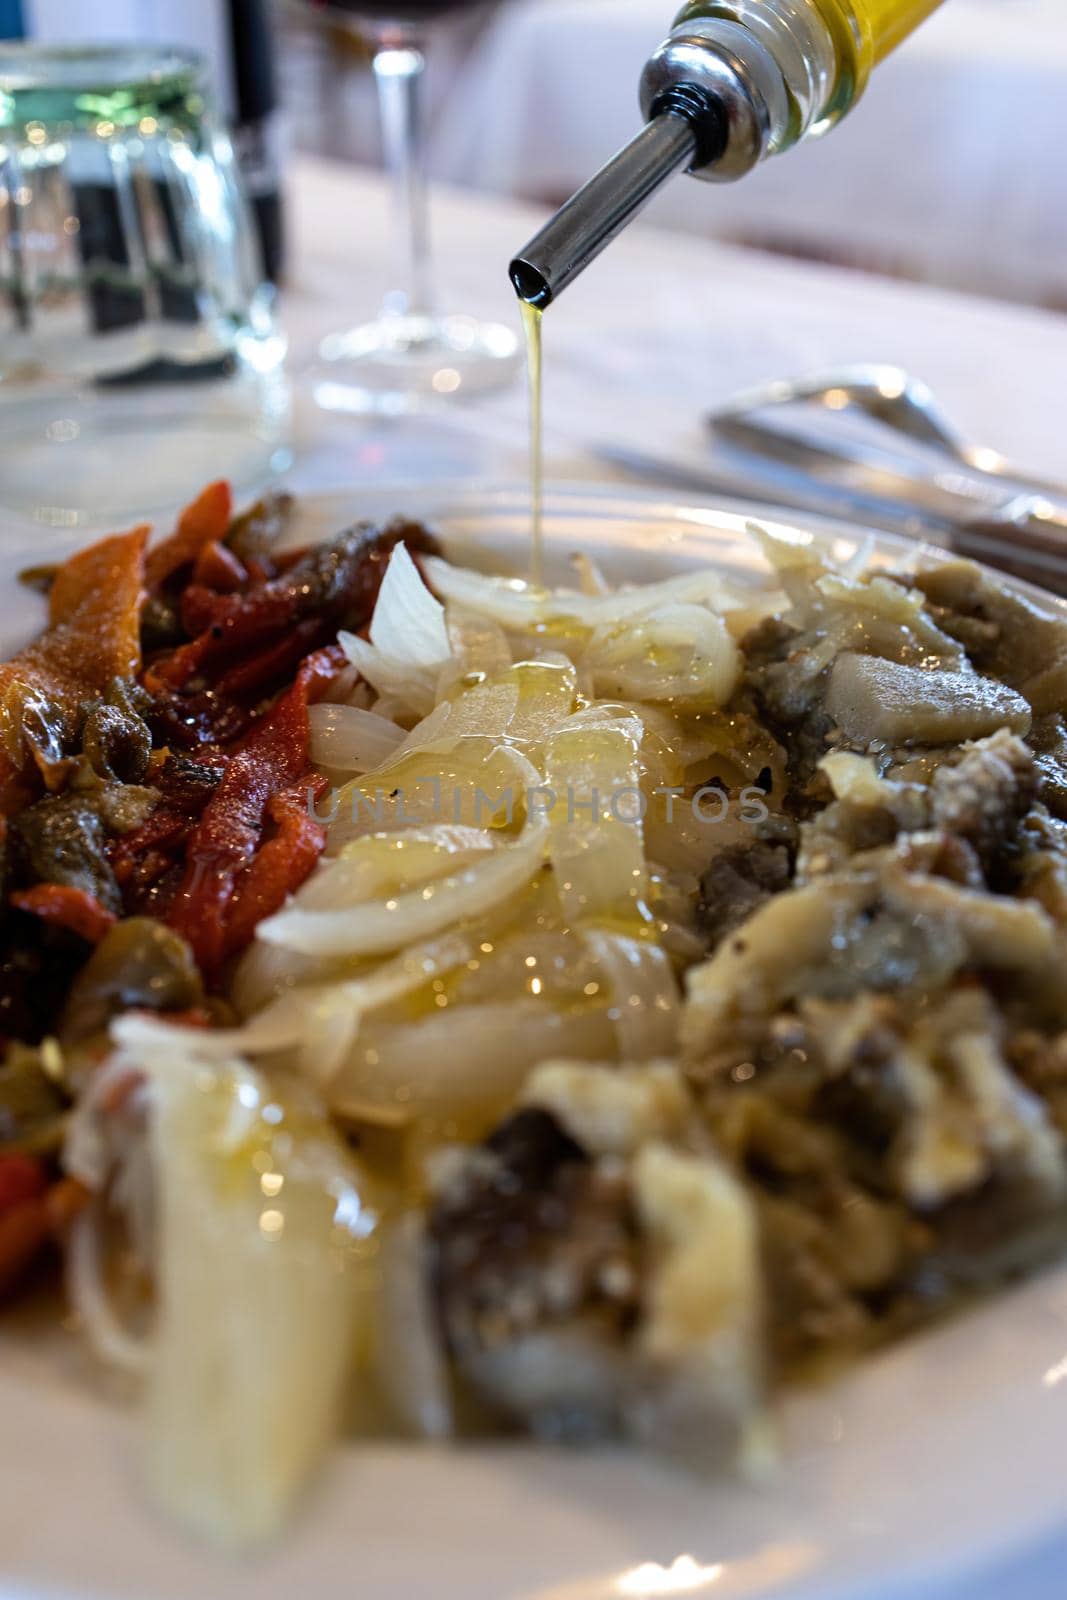 Healthy typical Catalan food in the restaurant, roasted vegetables, its name is escalivada by Digoarpi